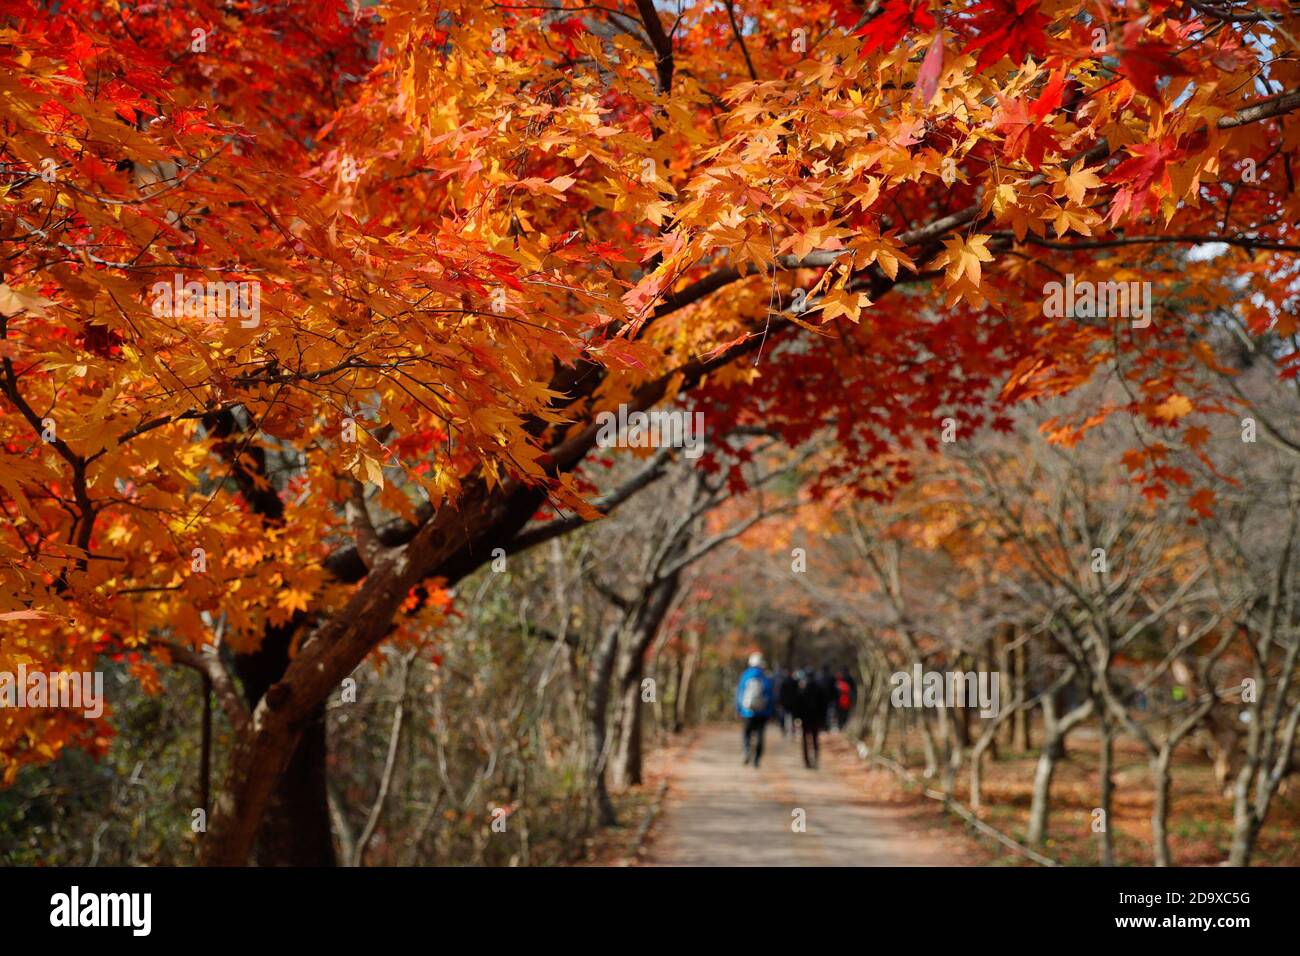 Jeongeup, South Korea. 8th Nov, 2020. People walk under maple trees at Naejangsan National Park in Jeongeup City of North Jeolla Province, South Korea, Nov. 8, 2020. Naejangsan is a popular tourist destination in South Korea, particularly in autumn due to its spectacular maple scenery. Credit: Wang Jingqiang/Xinhua/Alamy Live News Stock Photo